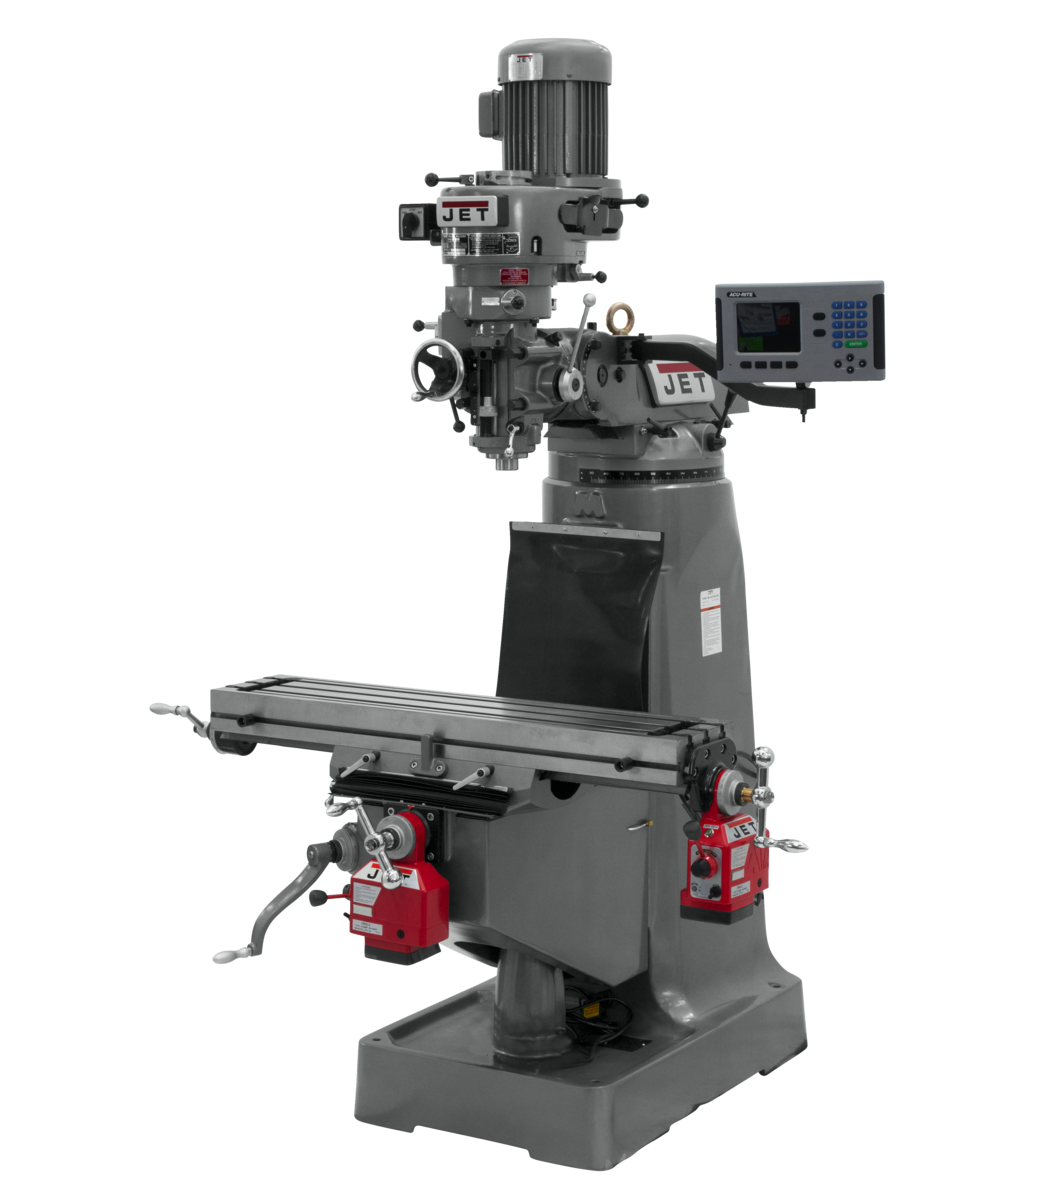 JTM-2 Mill With 3-Axis ACU-RITE 203 DRO (Quill) With X and Y-Axis Powerfeeds